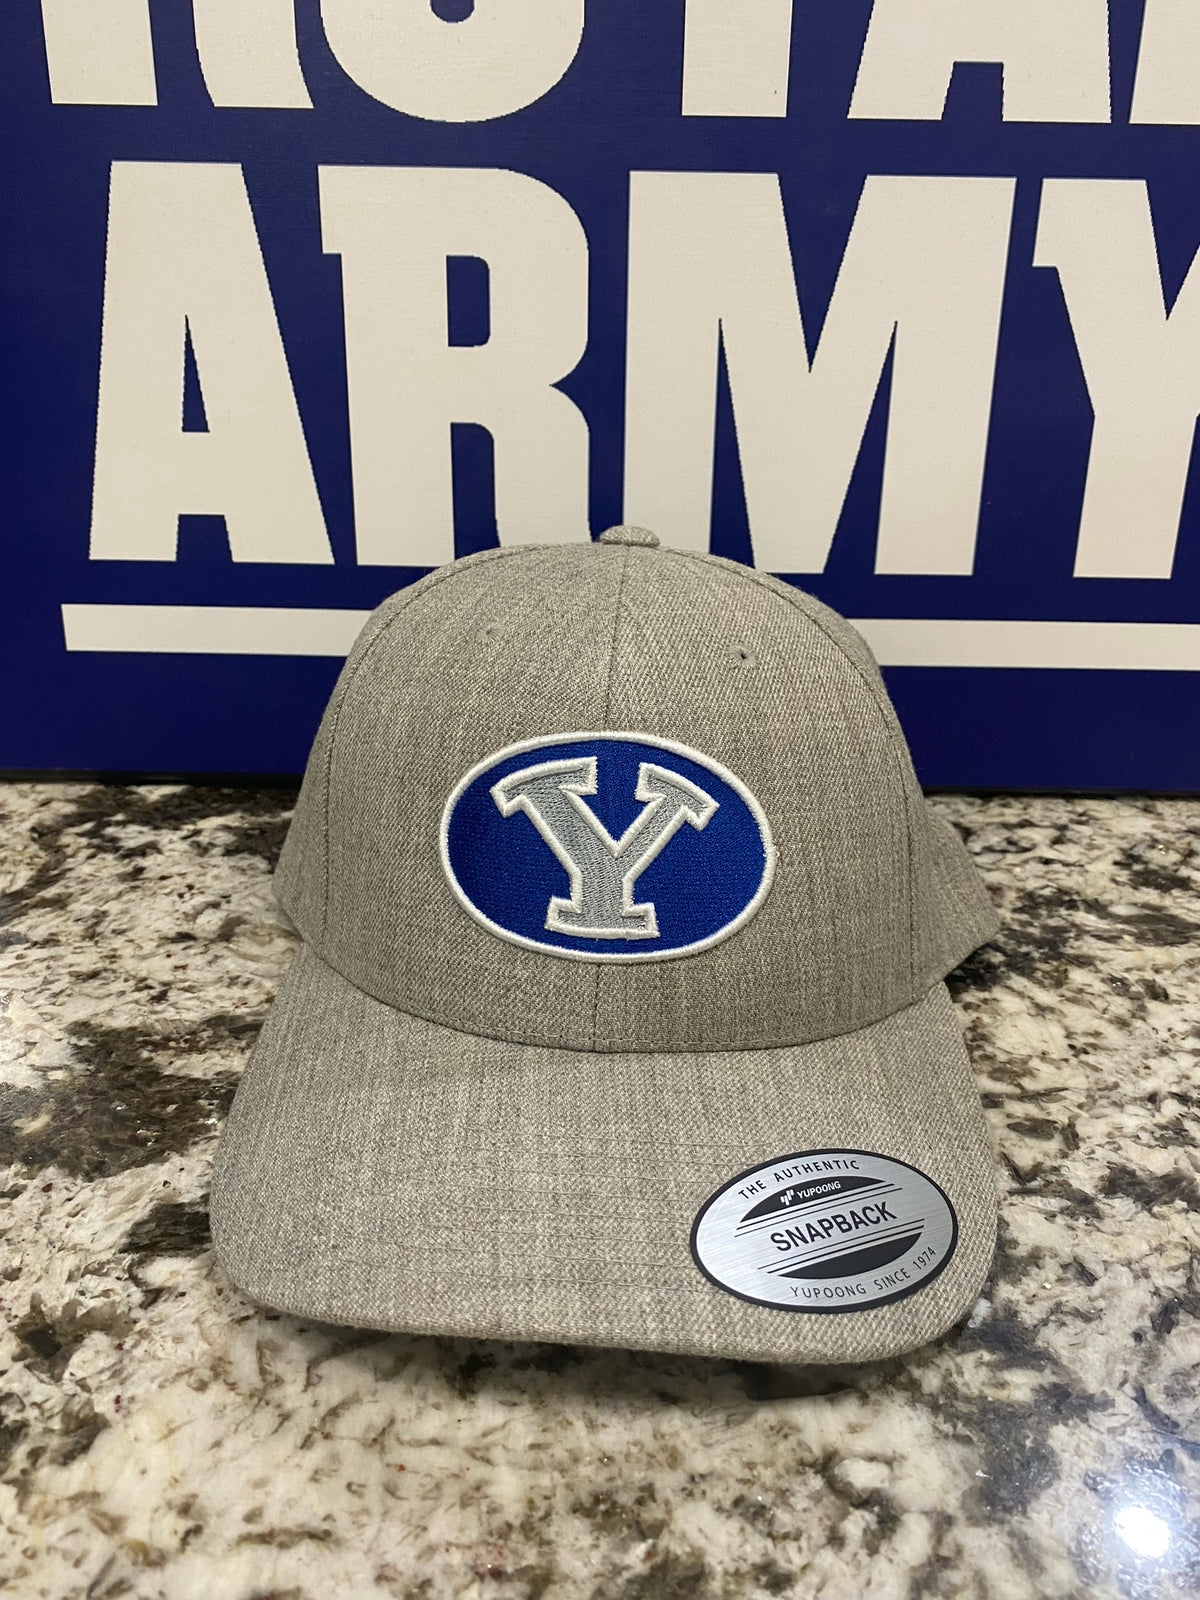 Heather Gray Snapback Hat with Embroidered BYU Stretch Y